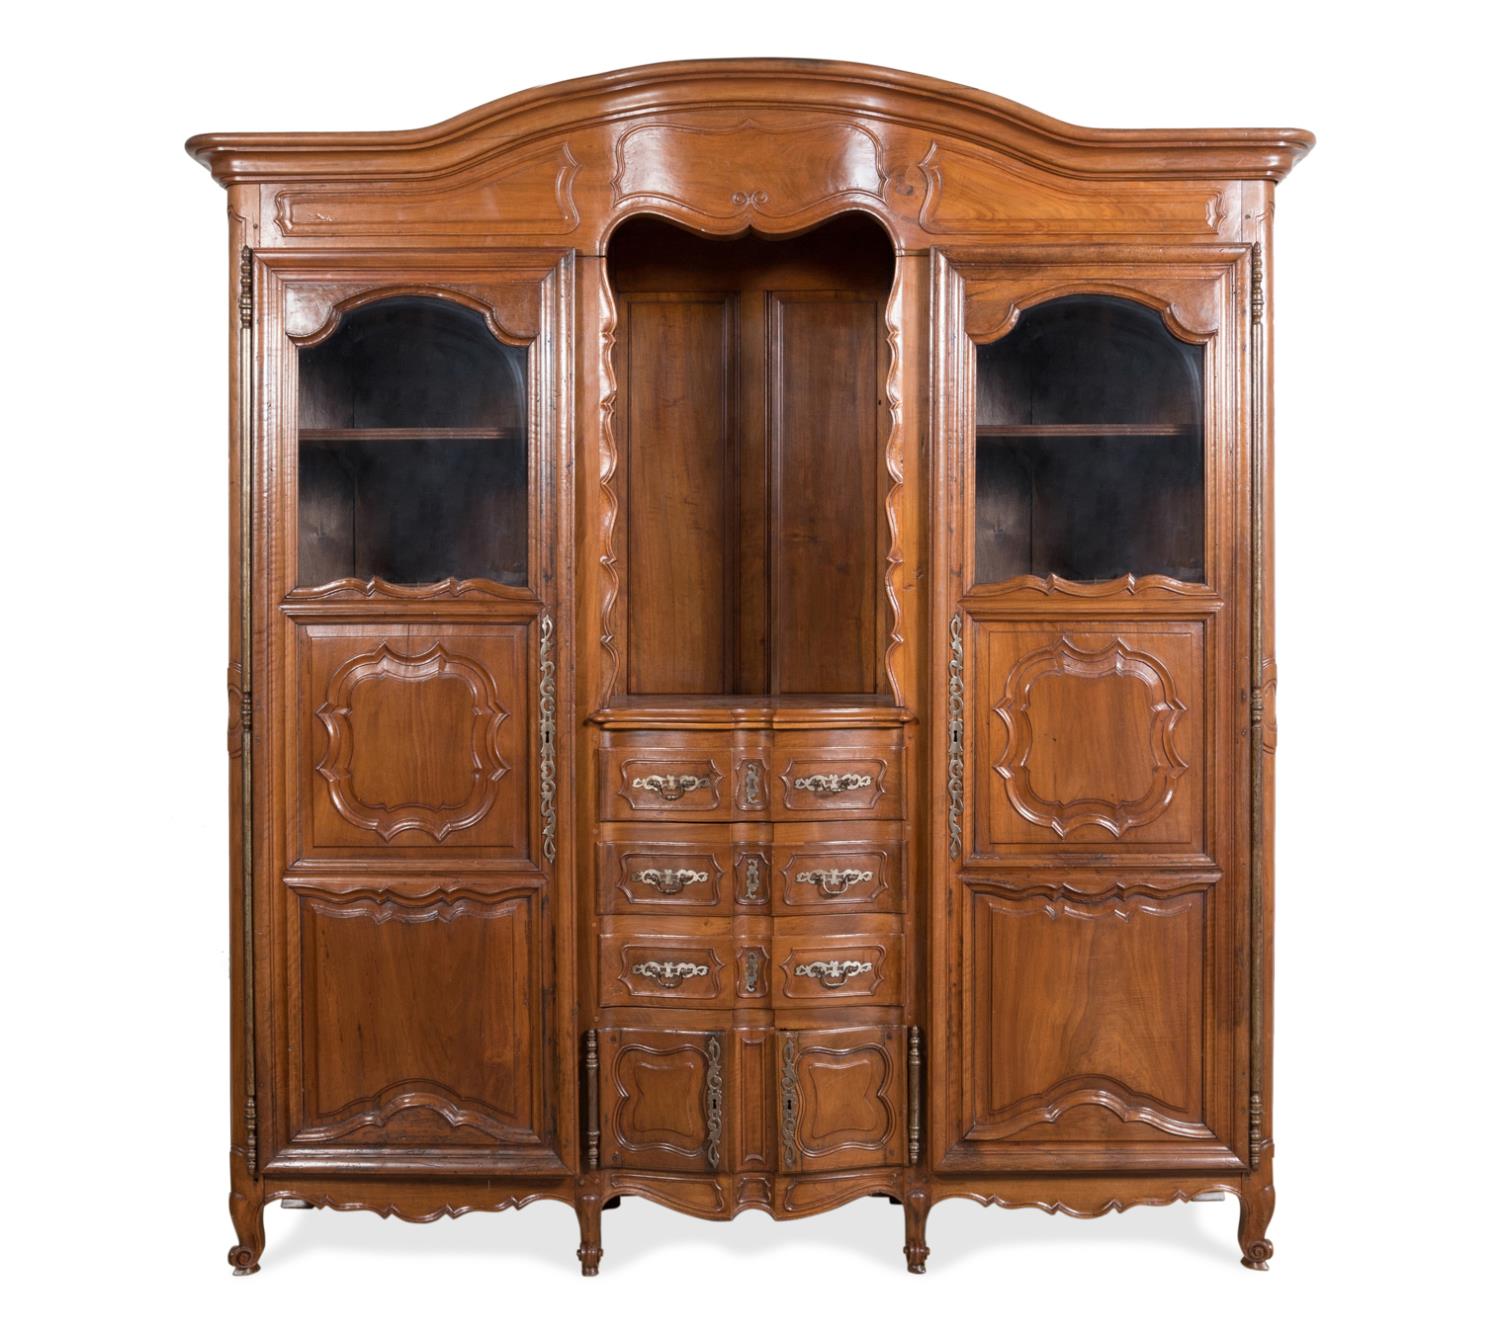 FRENCH PROVINCIAL LOUIS XV STYLE 3cd37f